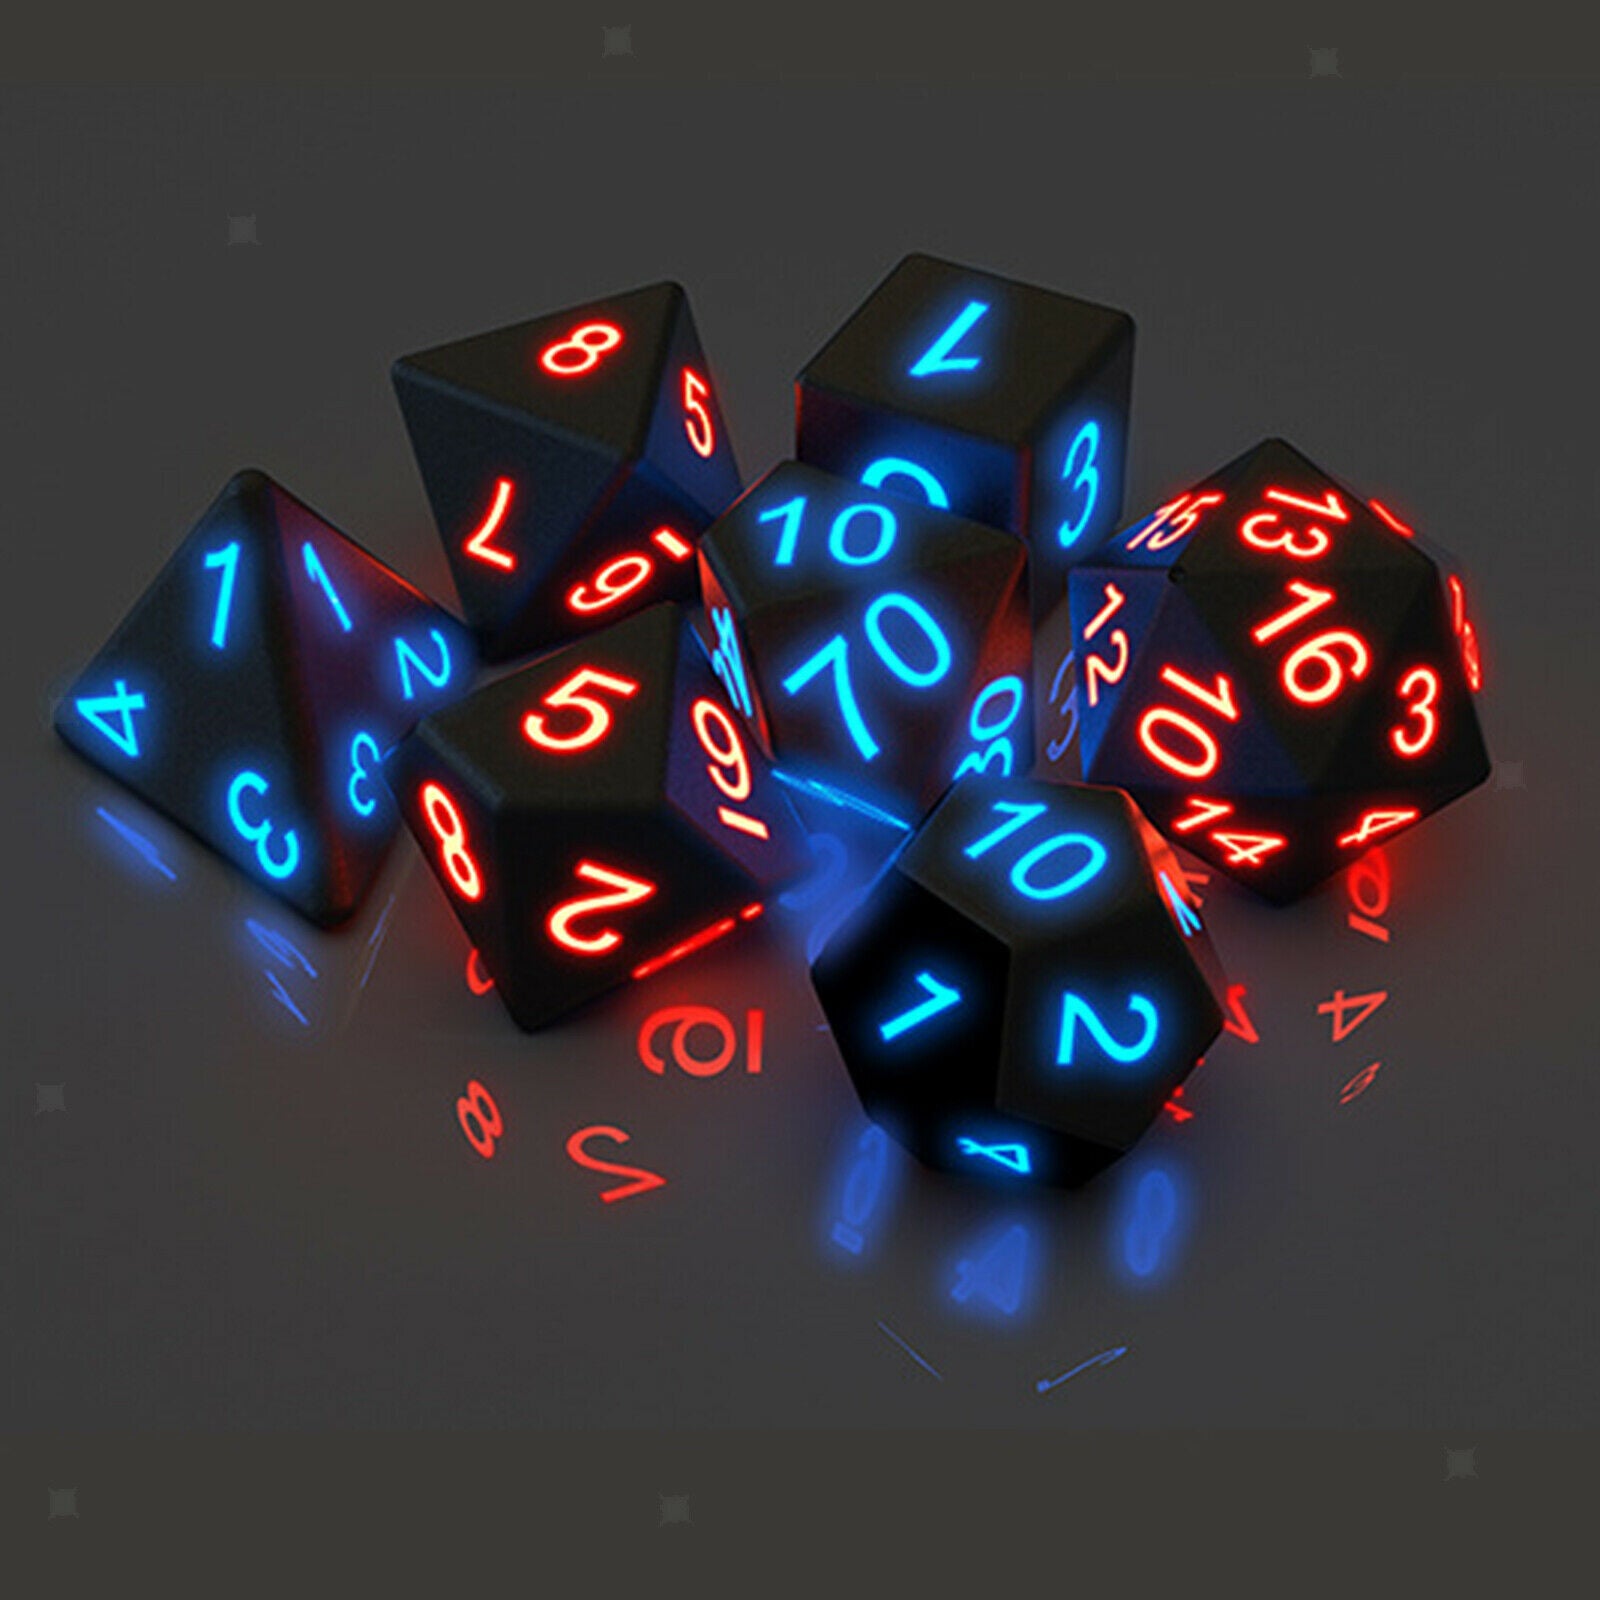 7x Glow-in-the-Dark Dices Multi Side Dice Set for Role Play Board Game Toys